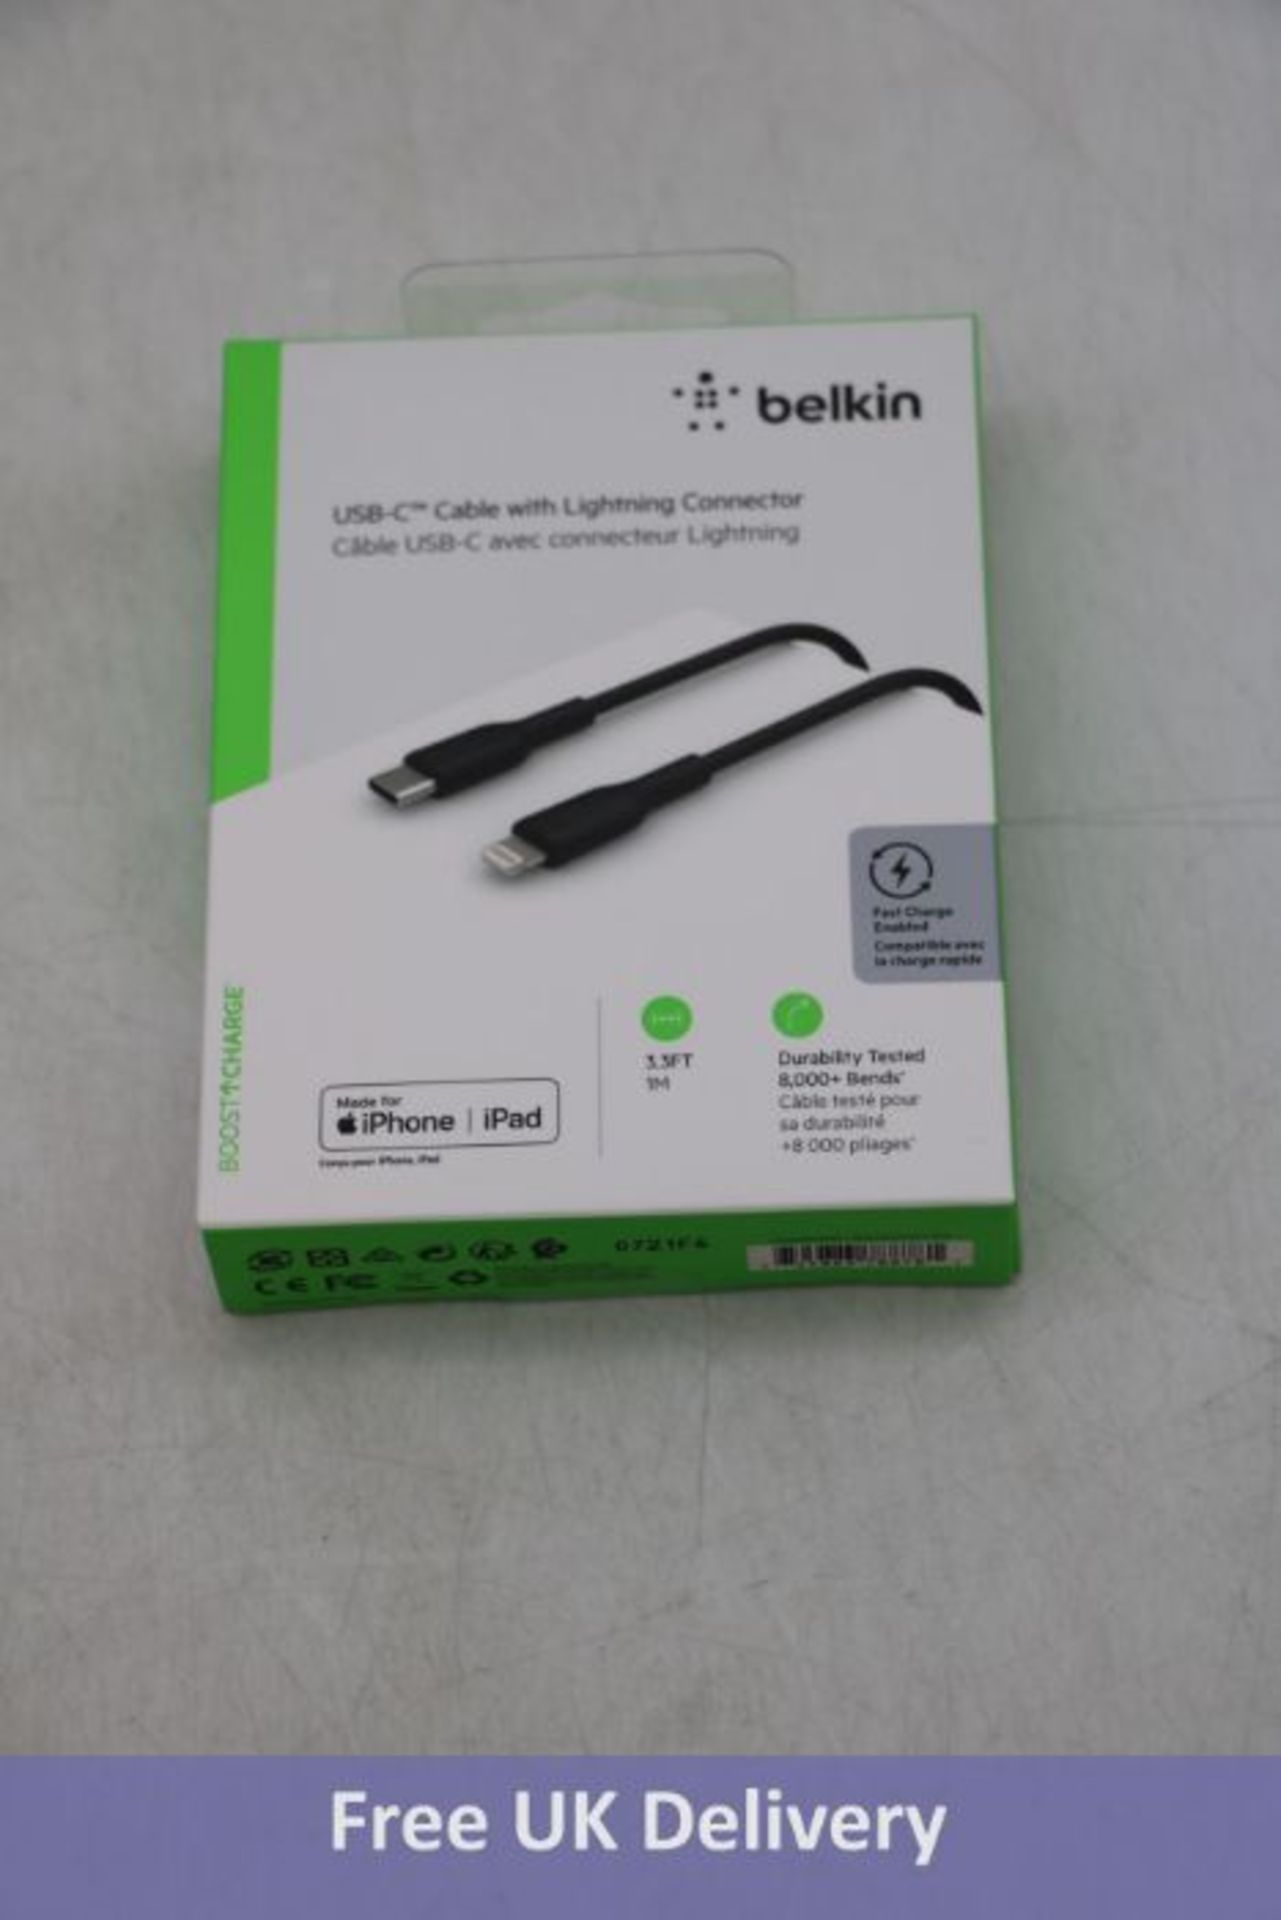 Six Belkin USB-C Cable with lightning connector, Fast Charge Enabled, 1m